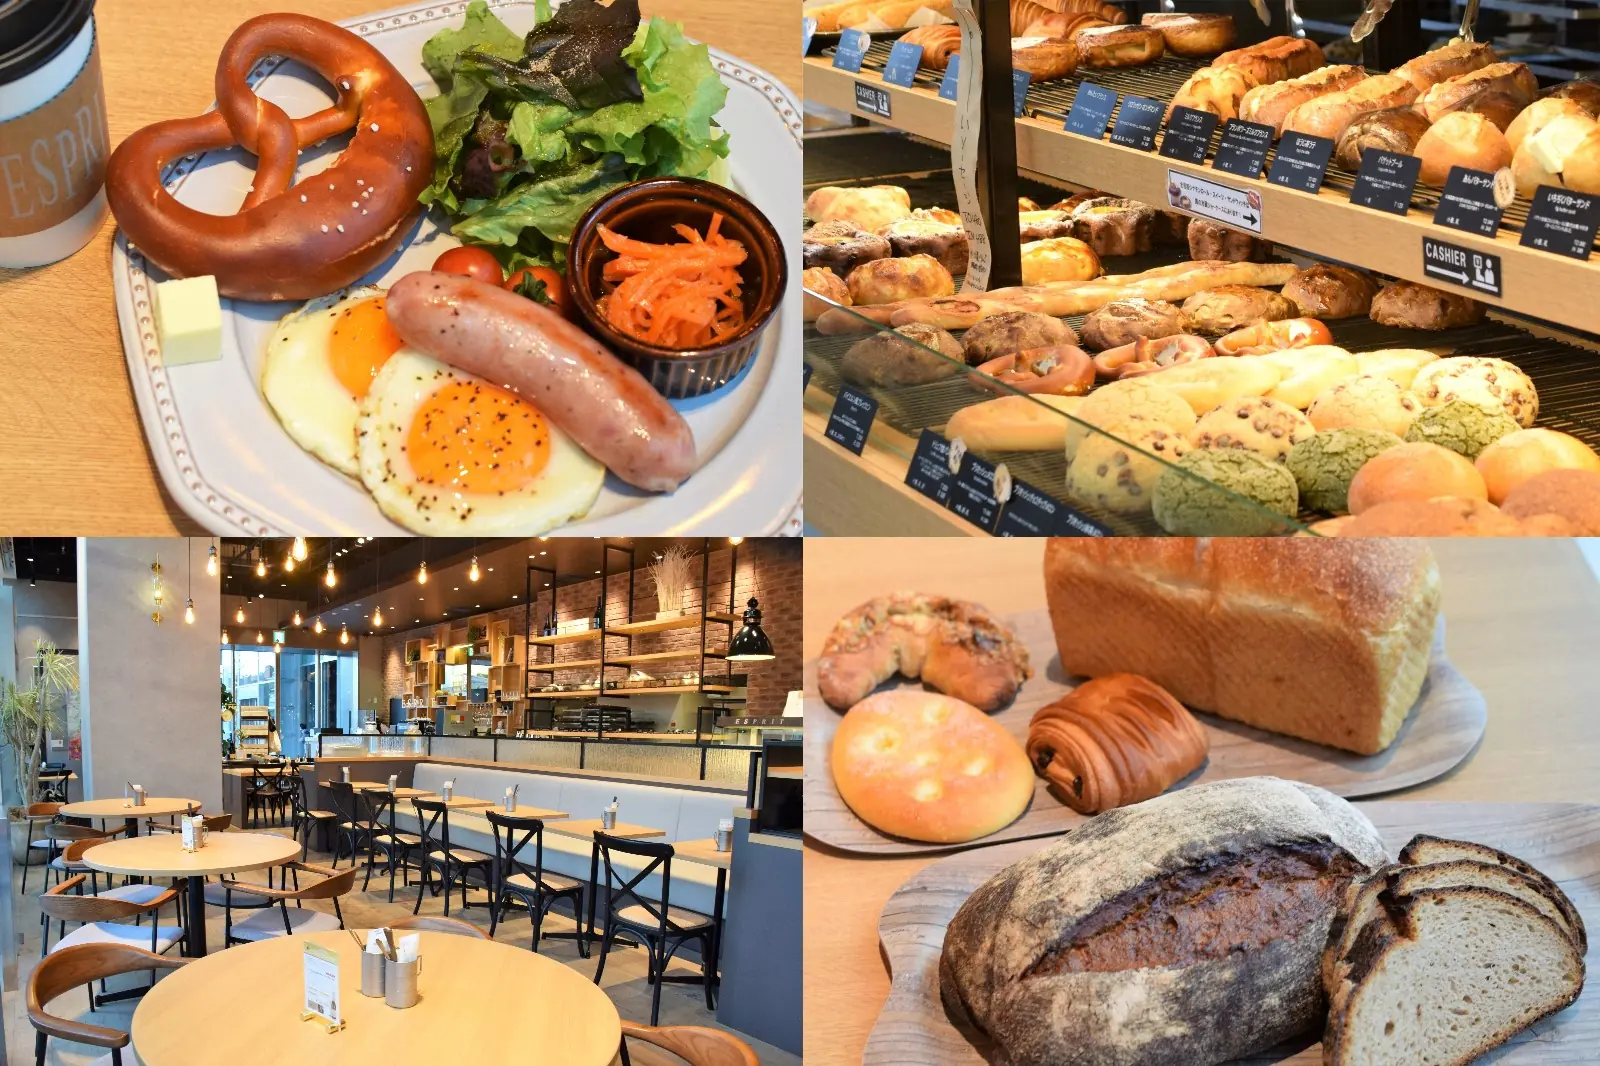 ESPRIT, a popular bakery in Gifu, is now in Nagoya! A bakery café where you can enjoy bread at　from morning breakfast to dinner.